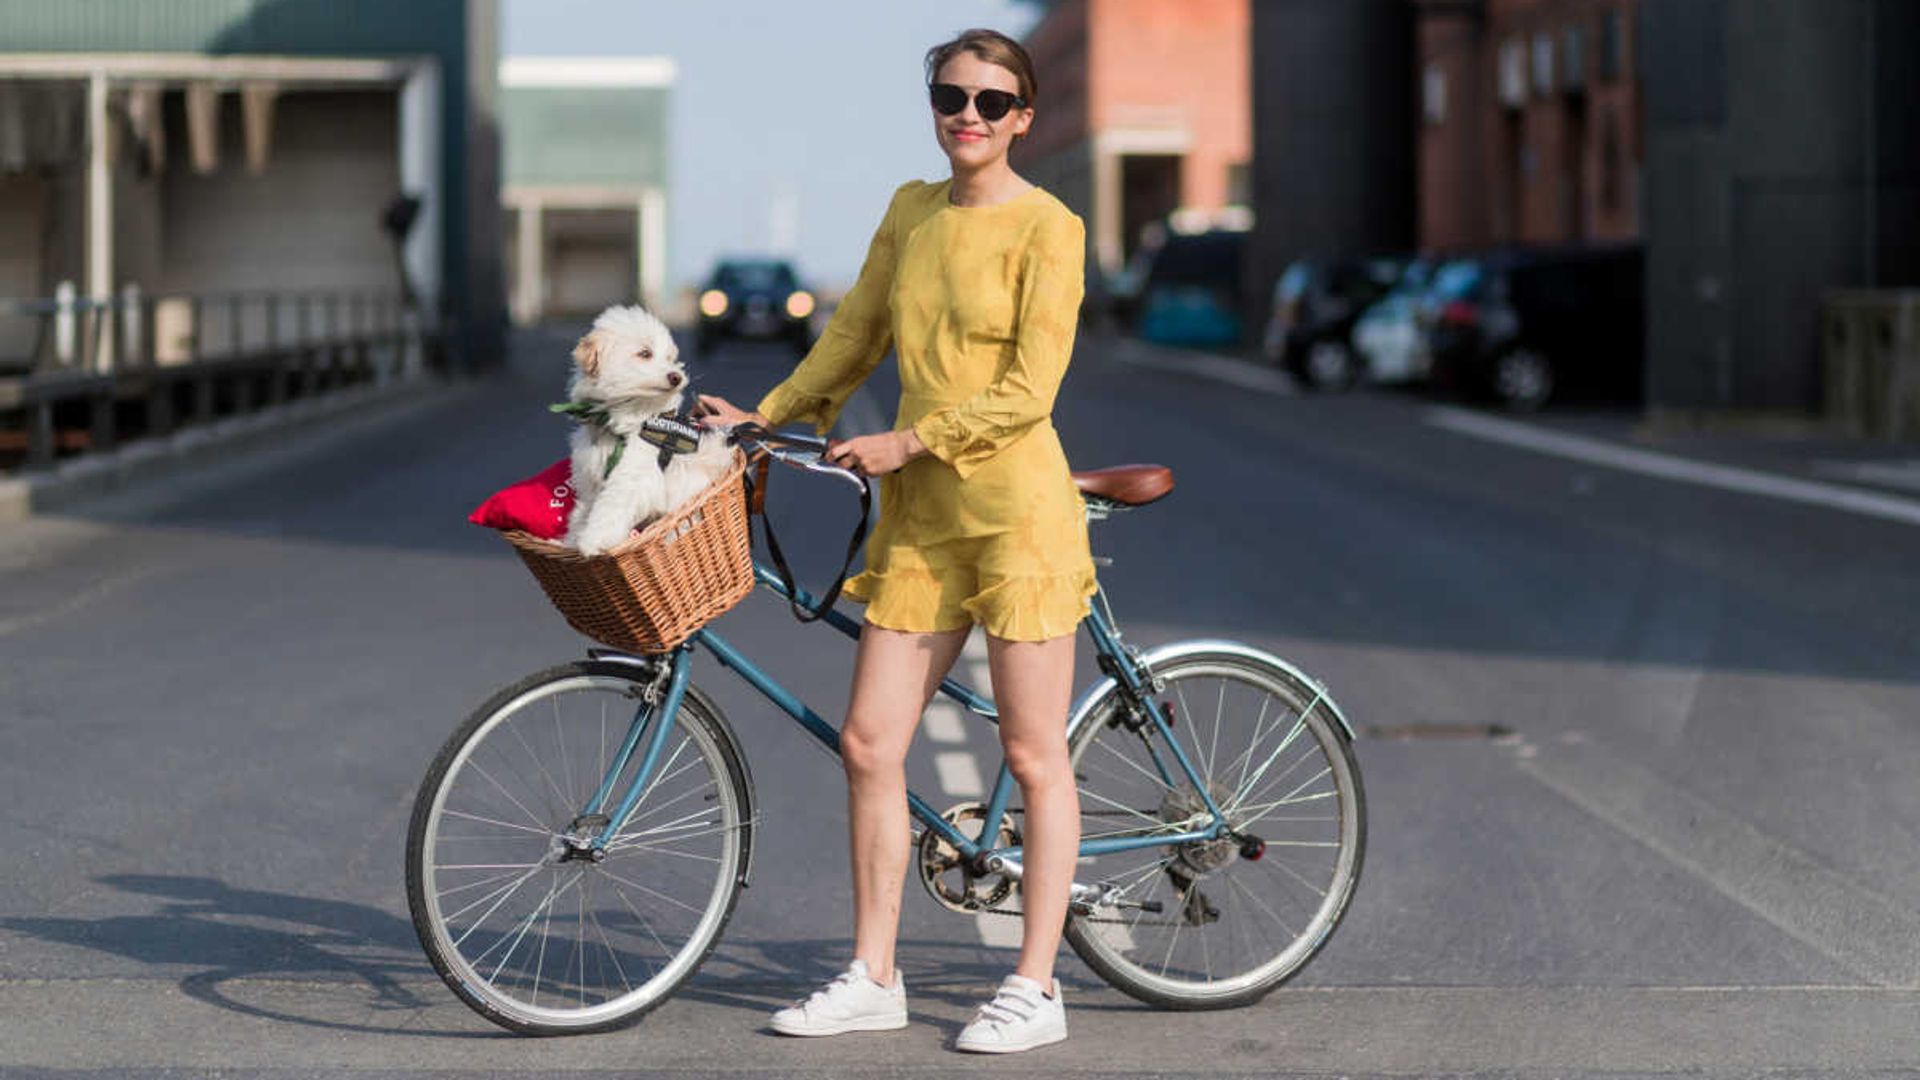 12 best bikes with baskets for ladies: Get inspired with these stylish bicycles